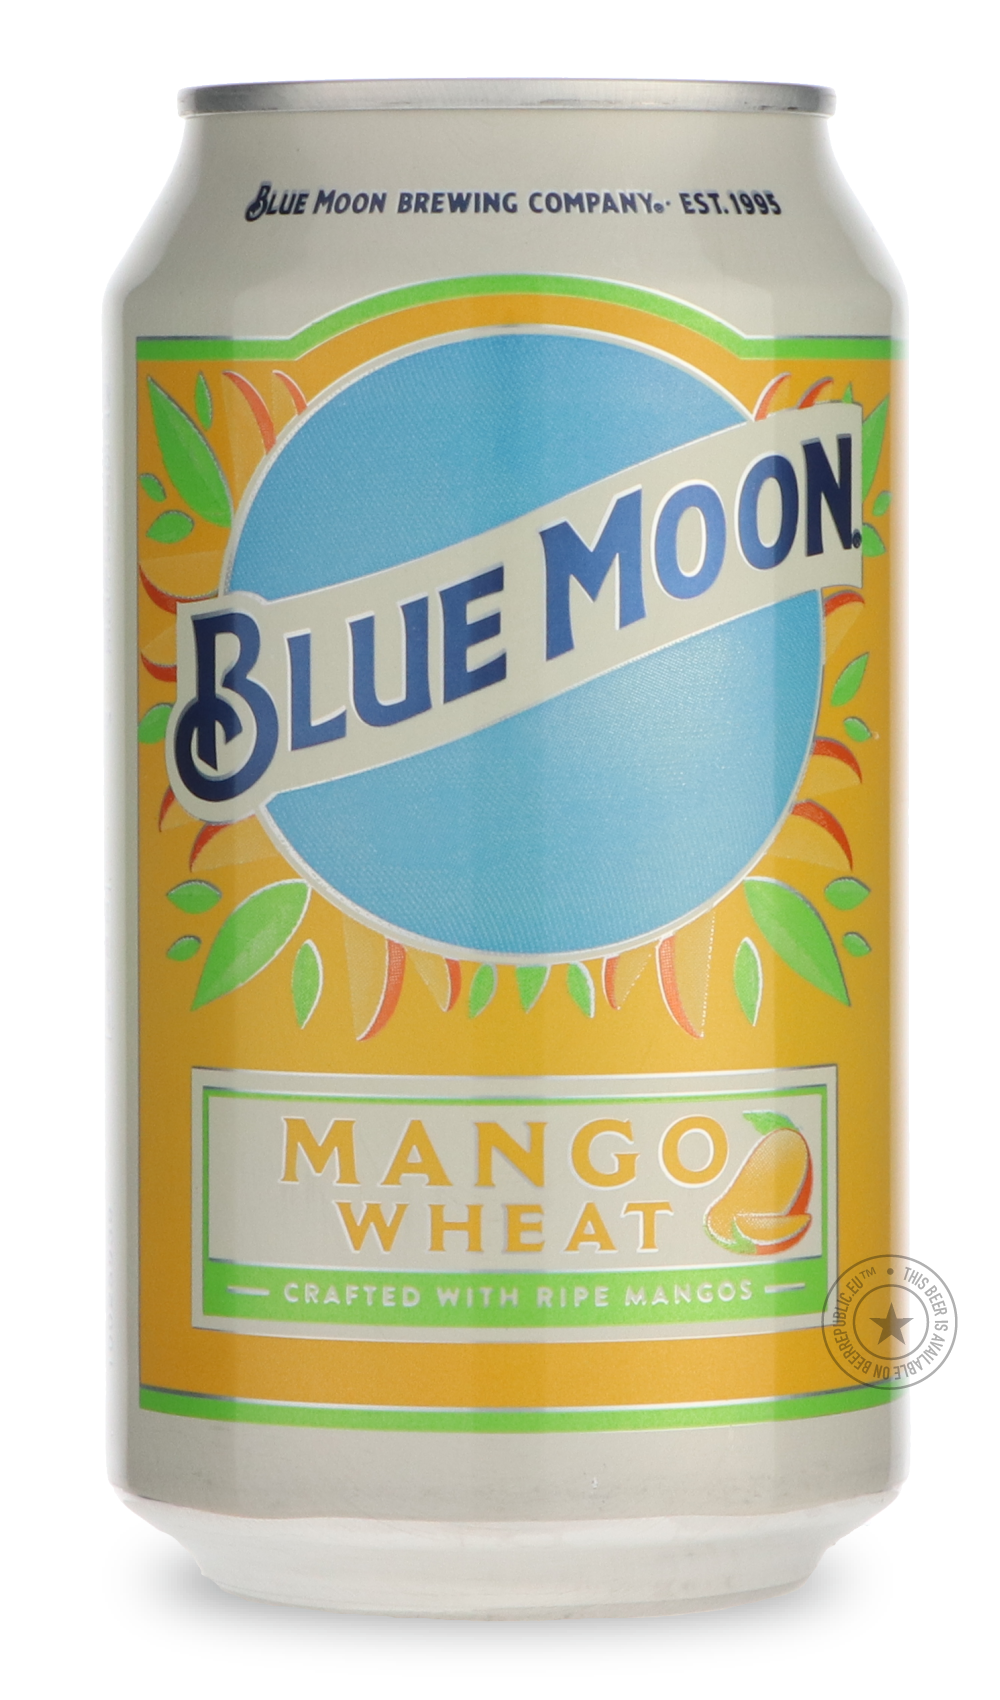 -Blue Moon- Mango Wheat-Pale- Only @ Beer Republic - The best online beer store for American & Canadian craft beer - Buy beer online from the USA and Canada - Bier online kopen - Amerikaans bier kopen - Craft beer store - Craft beer kopen - Amerikanisch bier kaufen - Bier online kaufen - Acheter biere online - IPA - Stout - Porter - New England IPA - Hazy IPA - Imperial Stout - Barrel Aged - Barrel Aged Imperial Stout - Brown - Dark beer - Blond - Blonde - Pilsner - Lager - Wheat - Weizen - Amber - Barley W